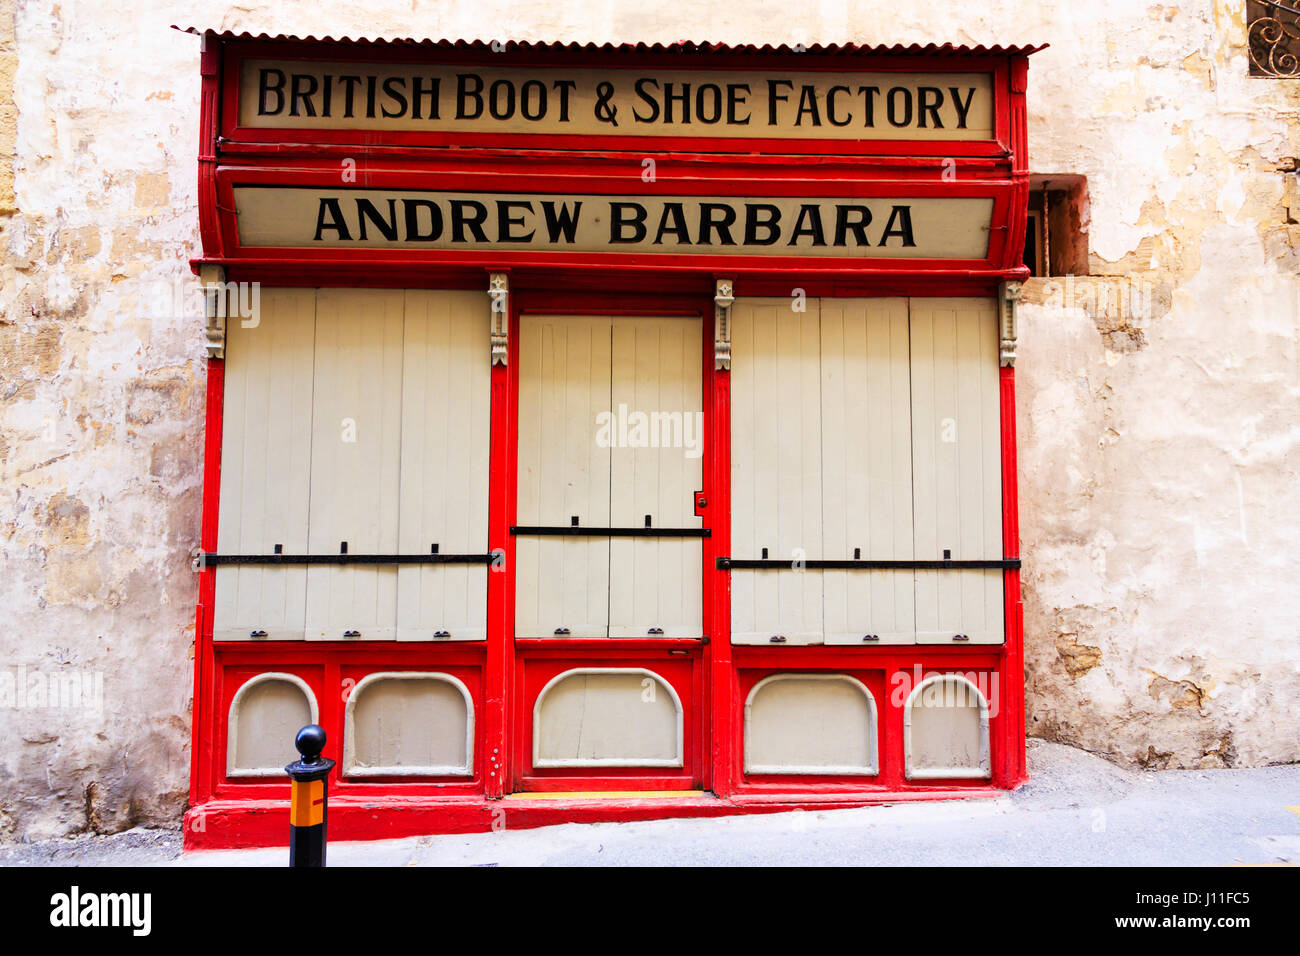 Andrew Barbara British boot and shoe factory outlet, Valletta, Malta Stock Photo